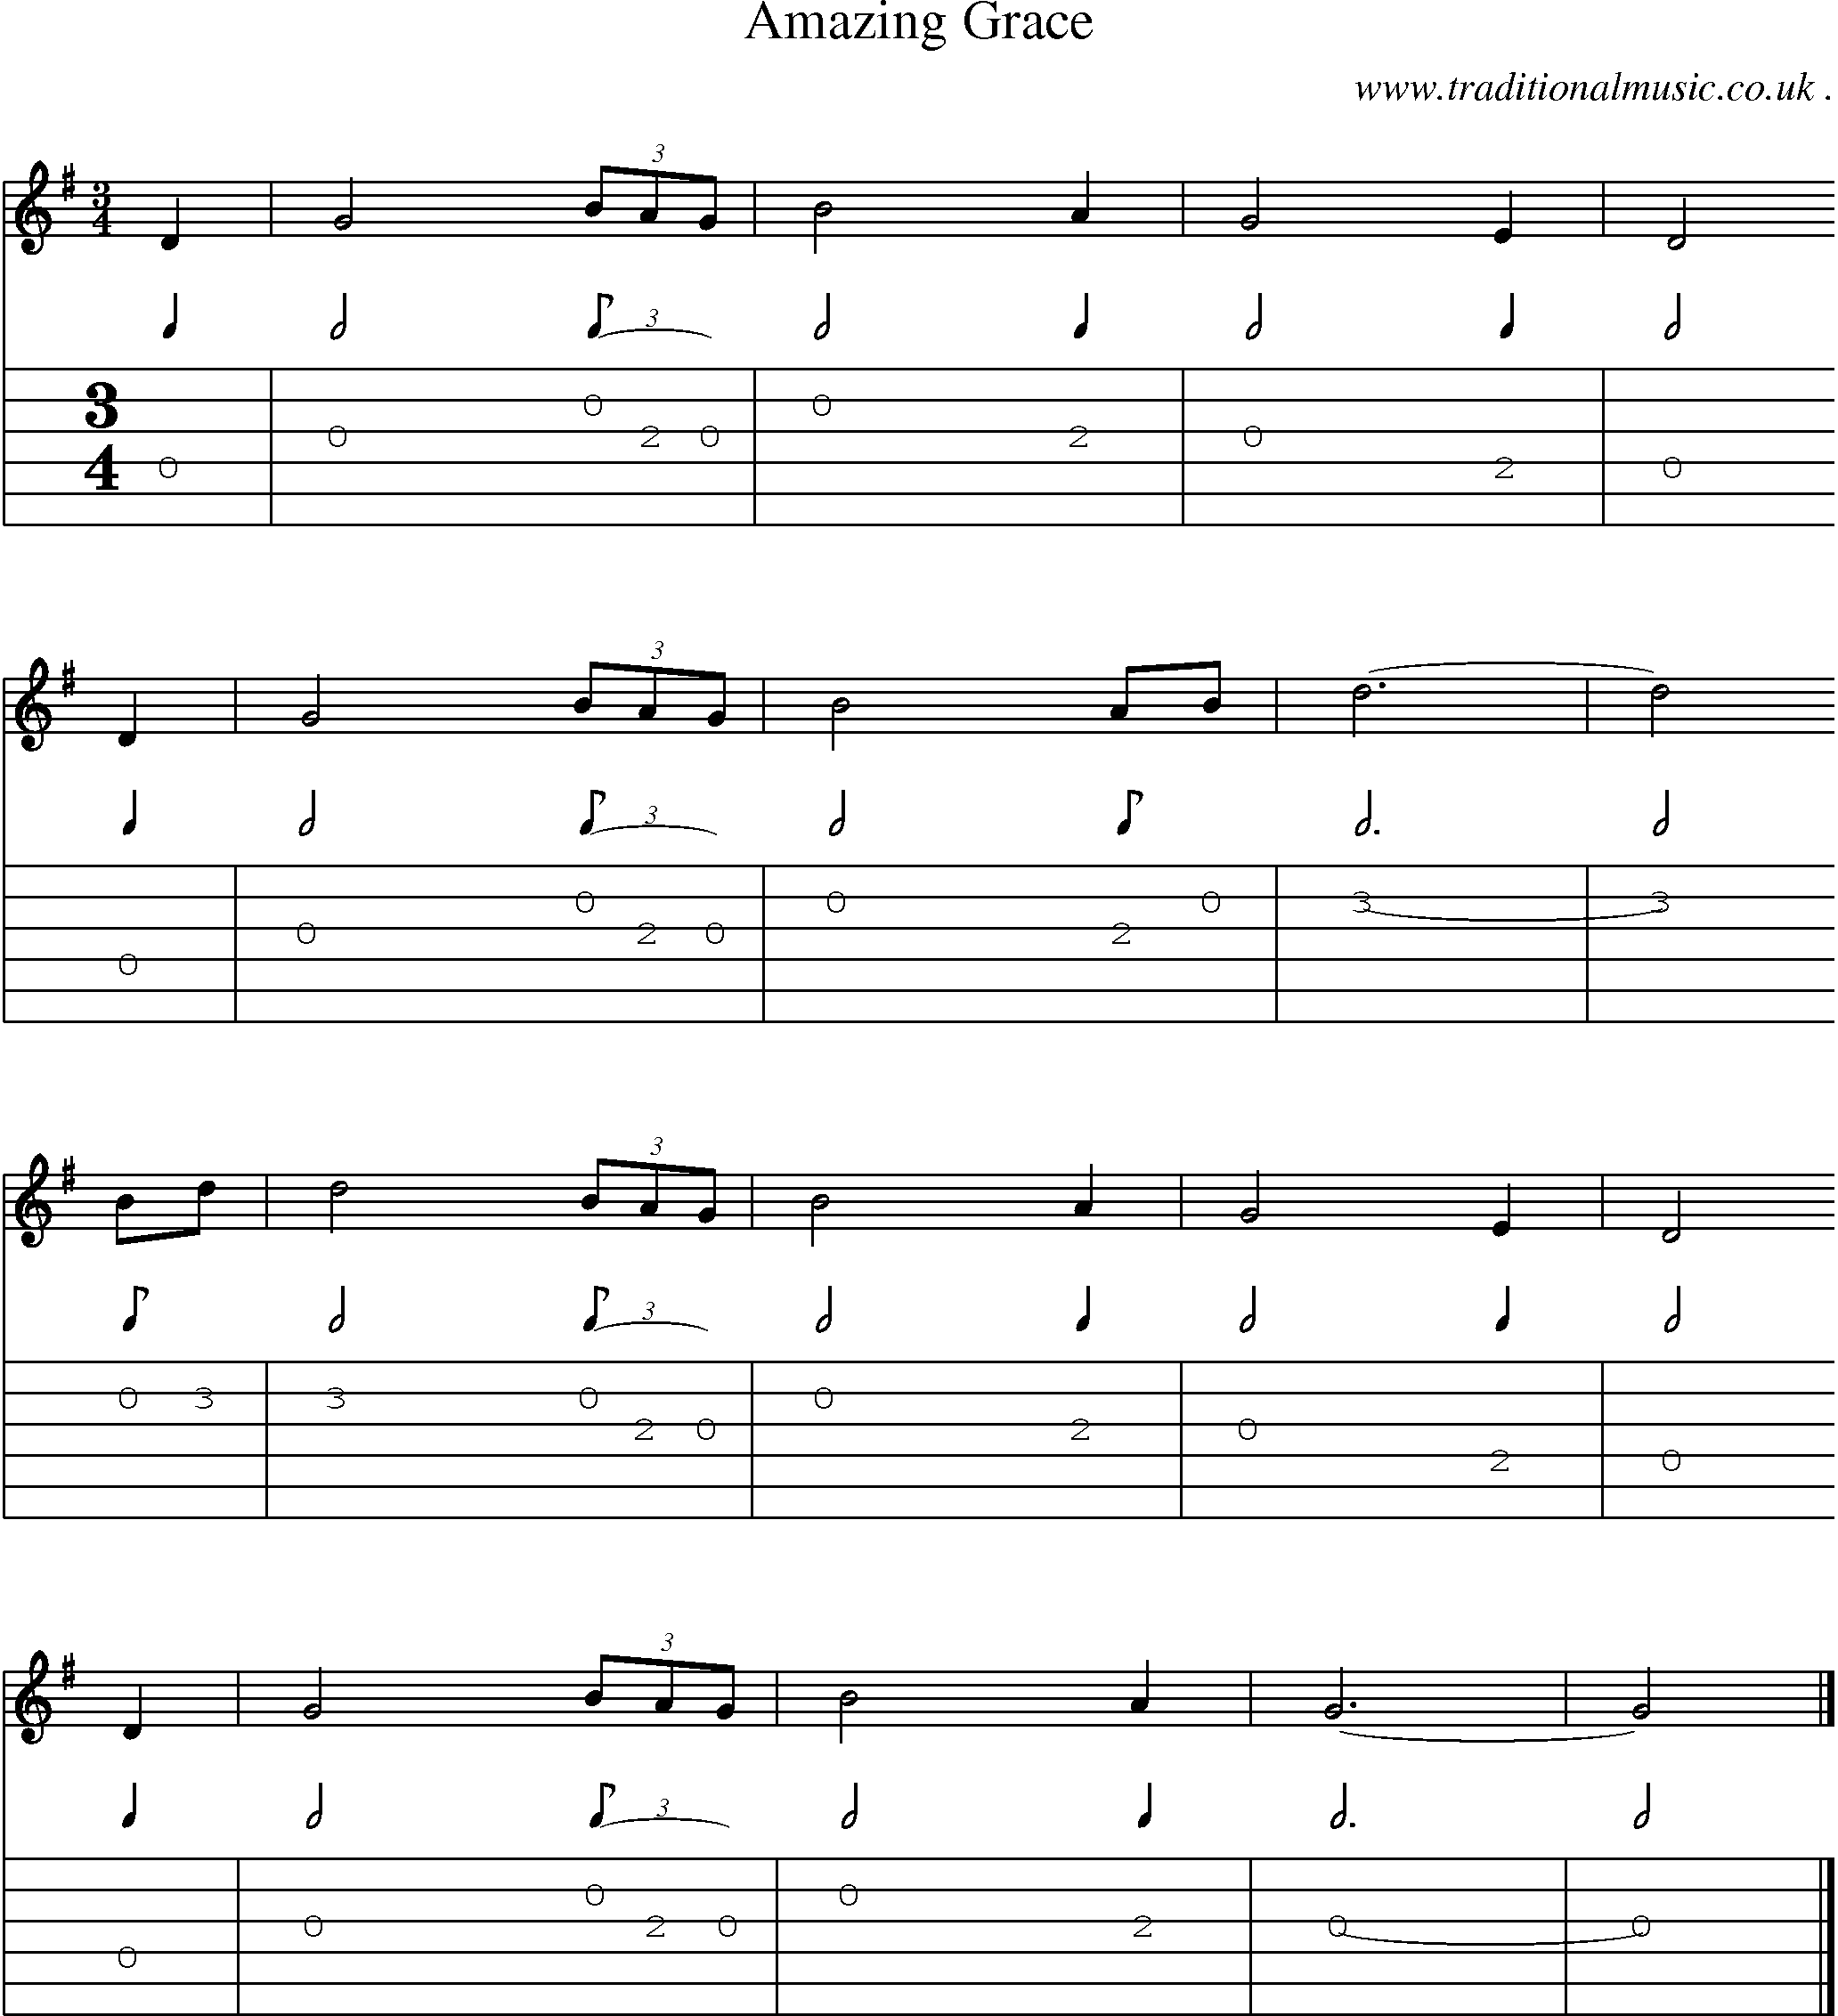 Sheet-music  score, Chords and Guitar Tabs for Amazing Grace